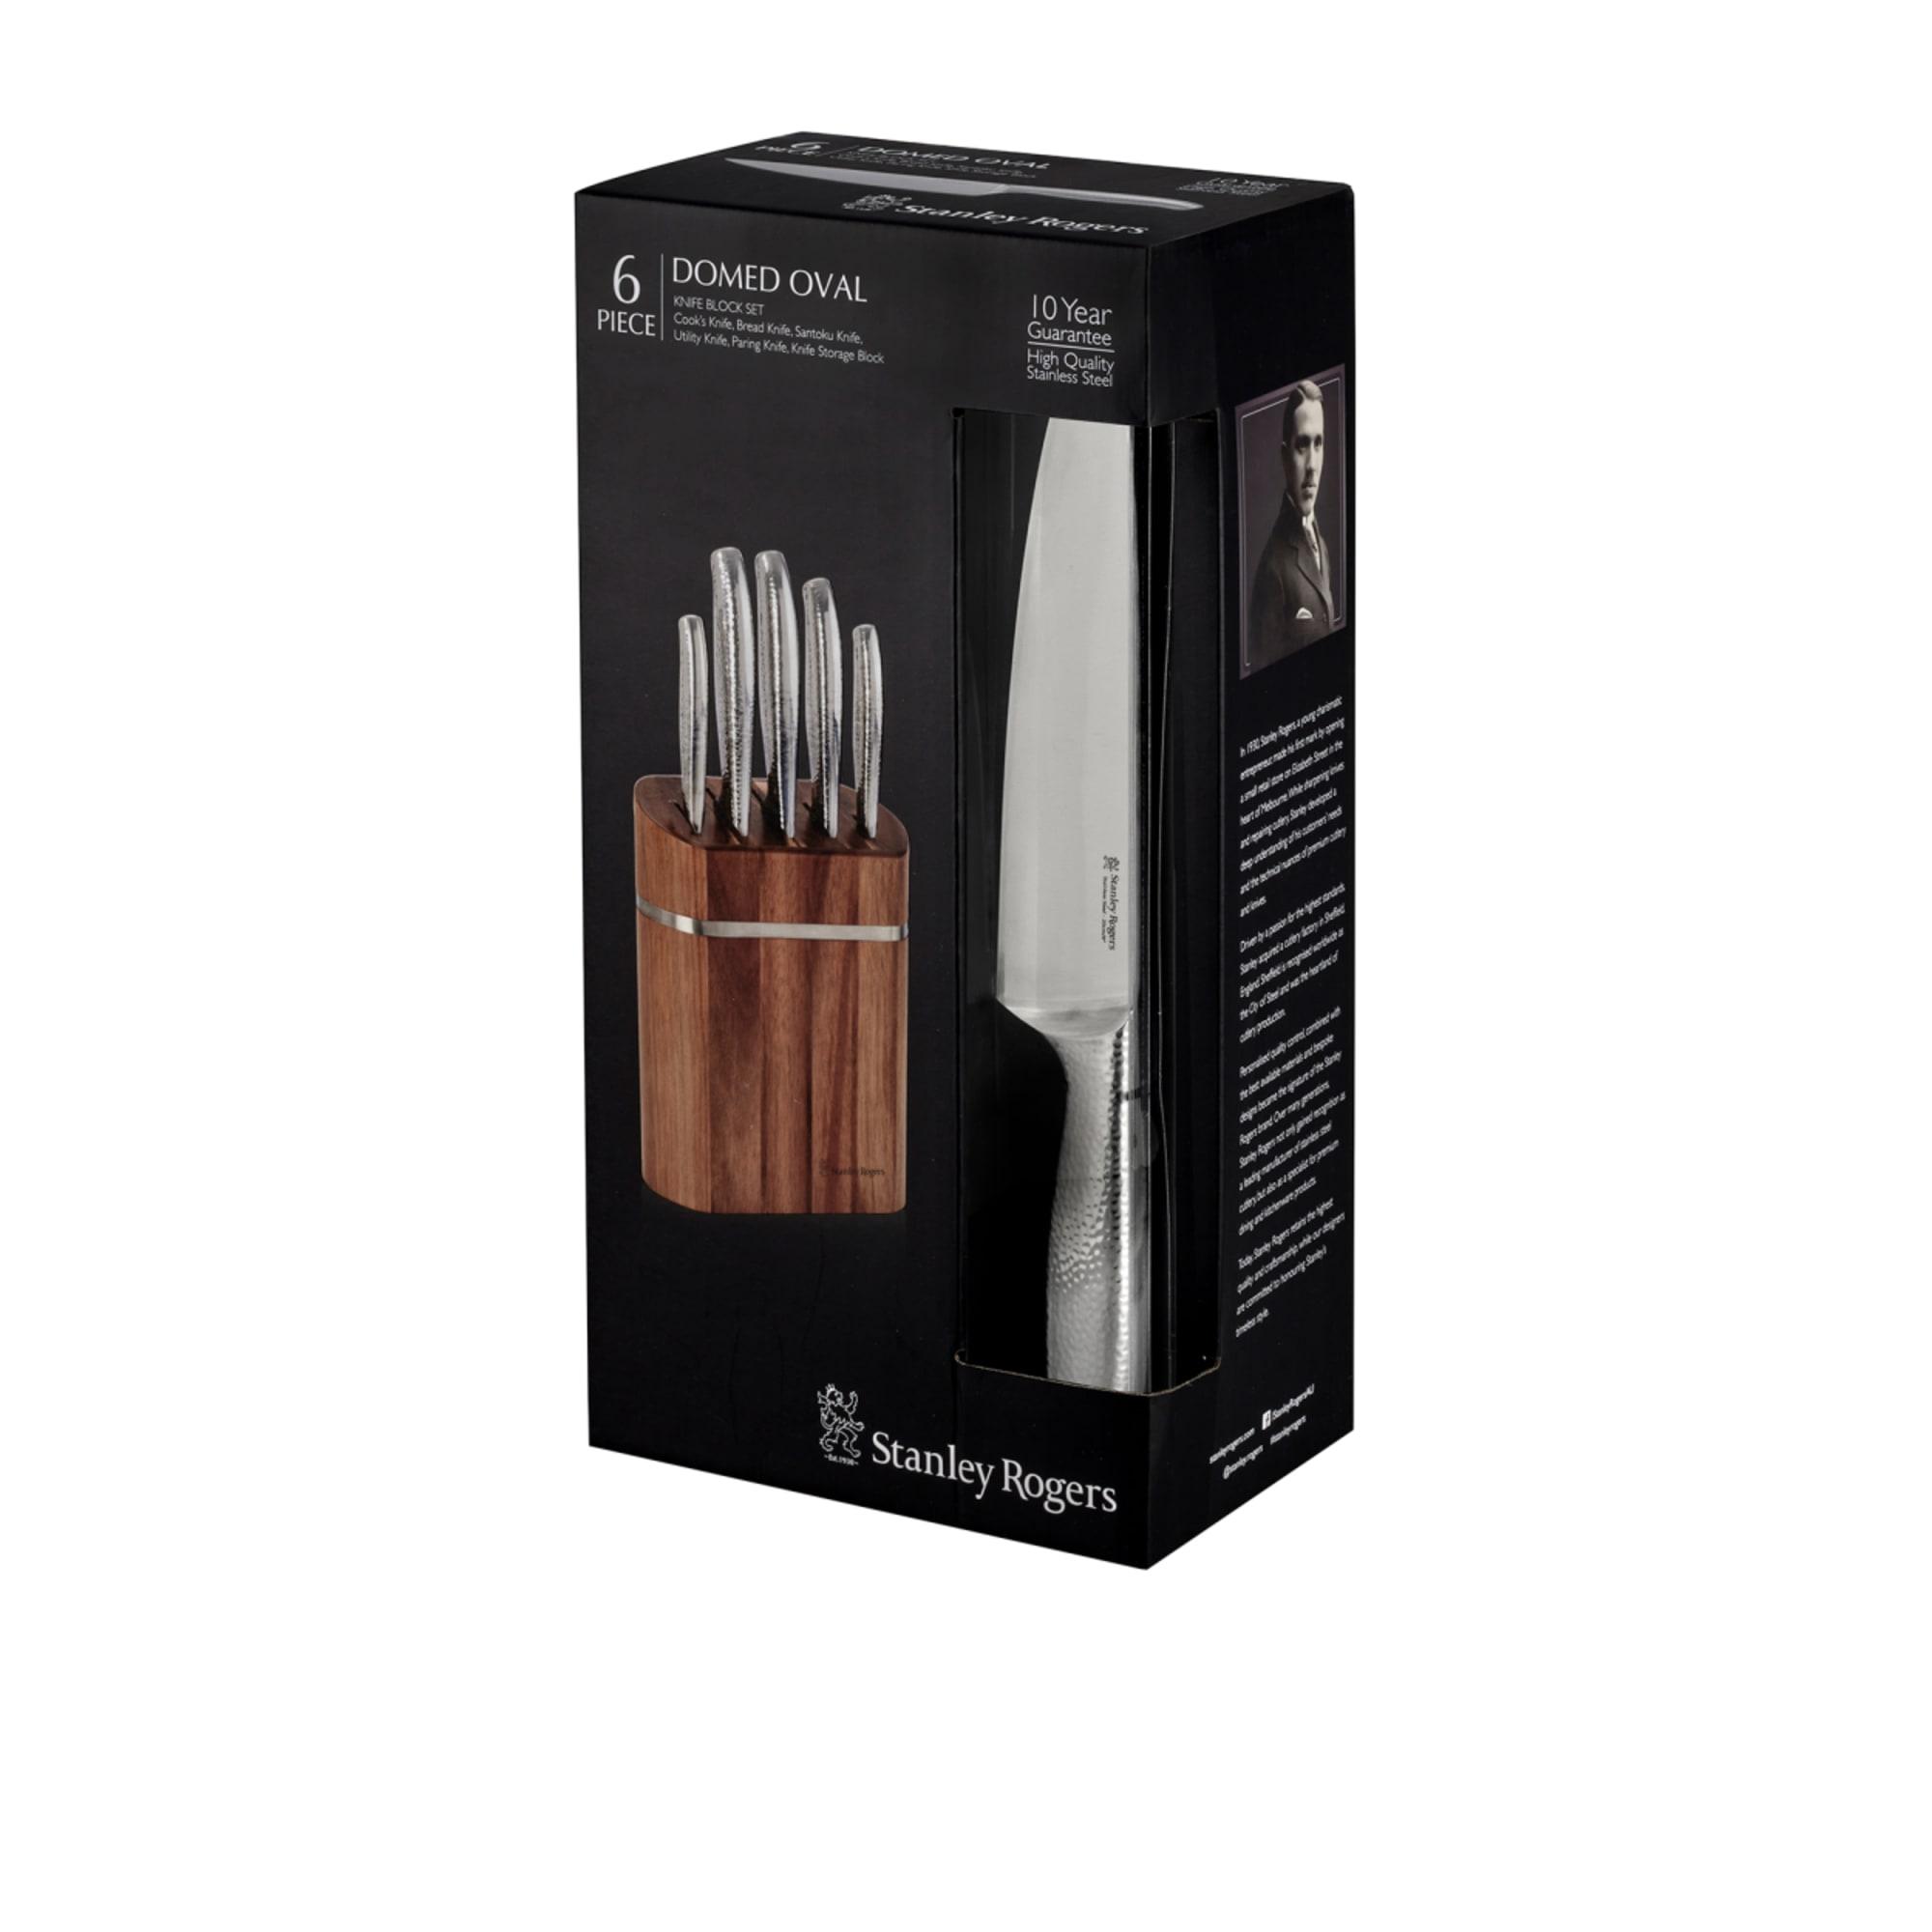 Stanley Rogers 6pc Oval Domed Knife Block Set Image 4